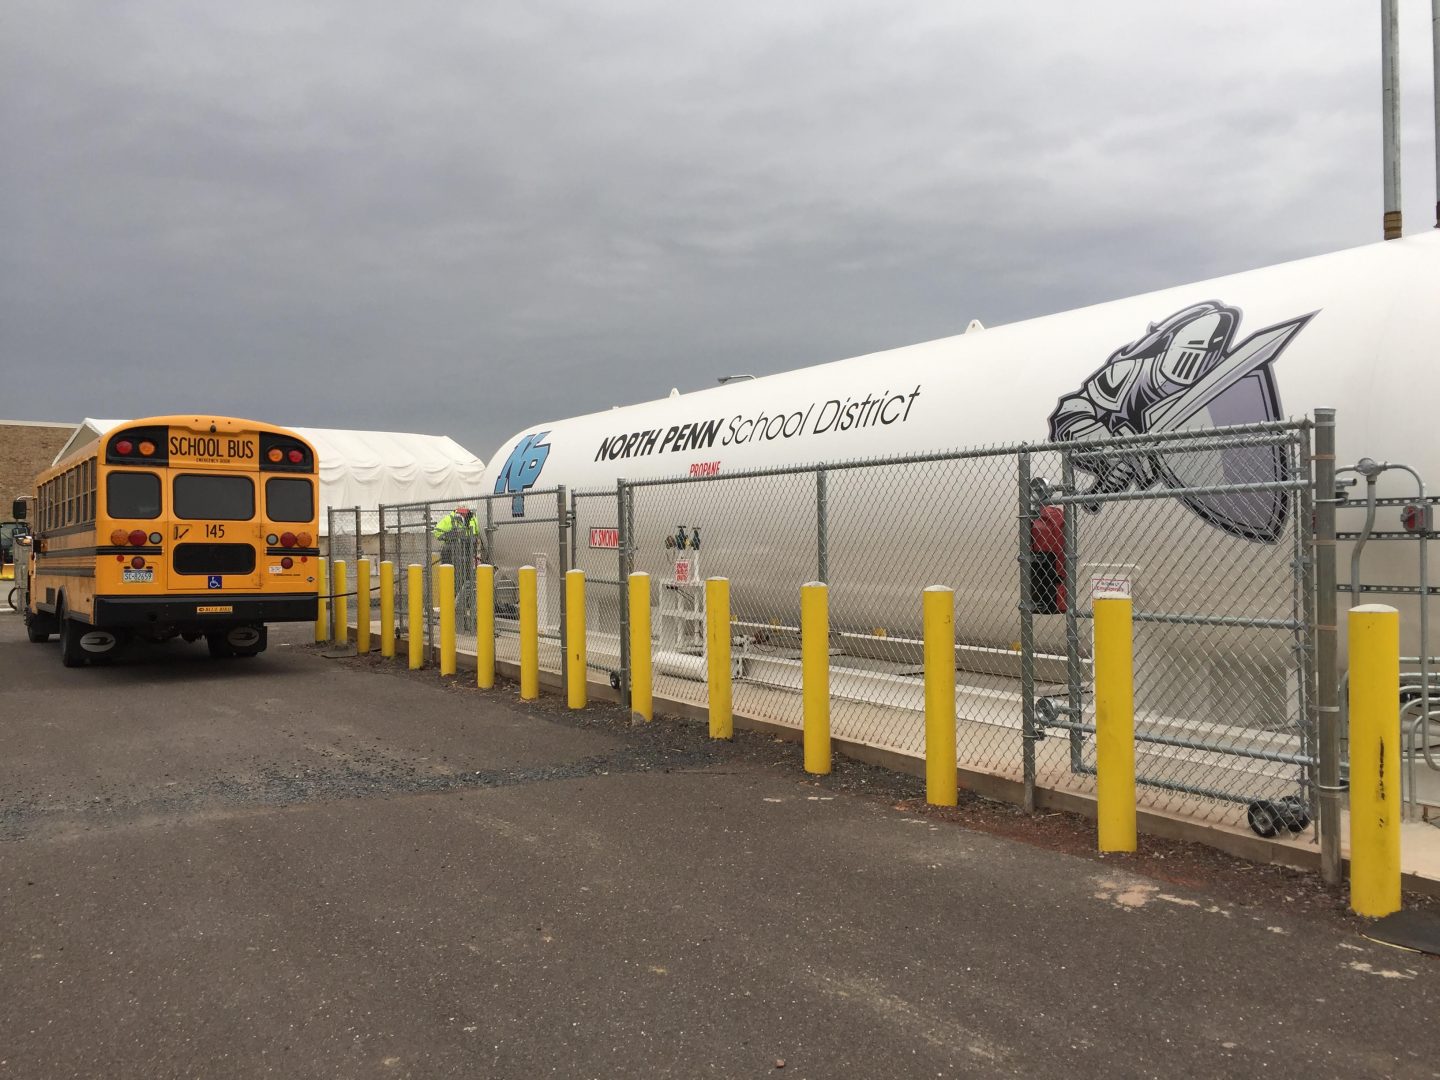 More and more school districts are adding propane buses to their fleets and switching from diesel. They cite financial and environmental benefits.